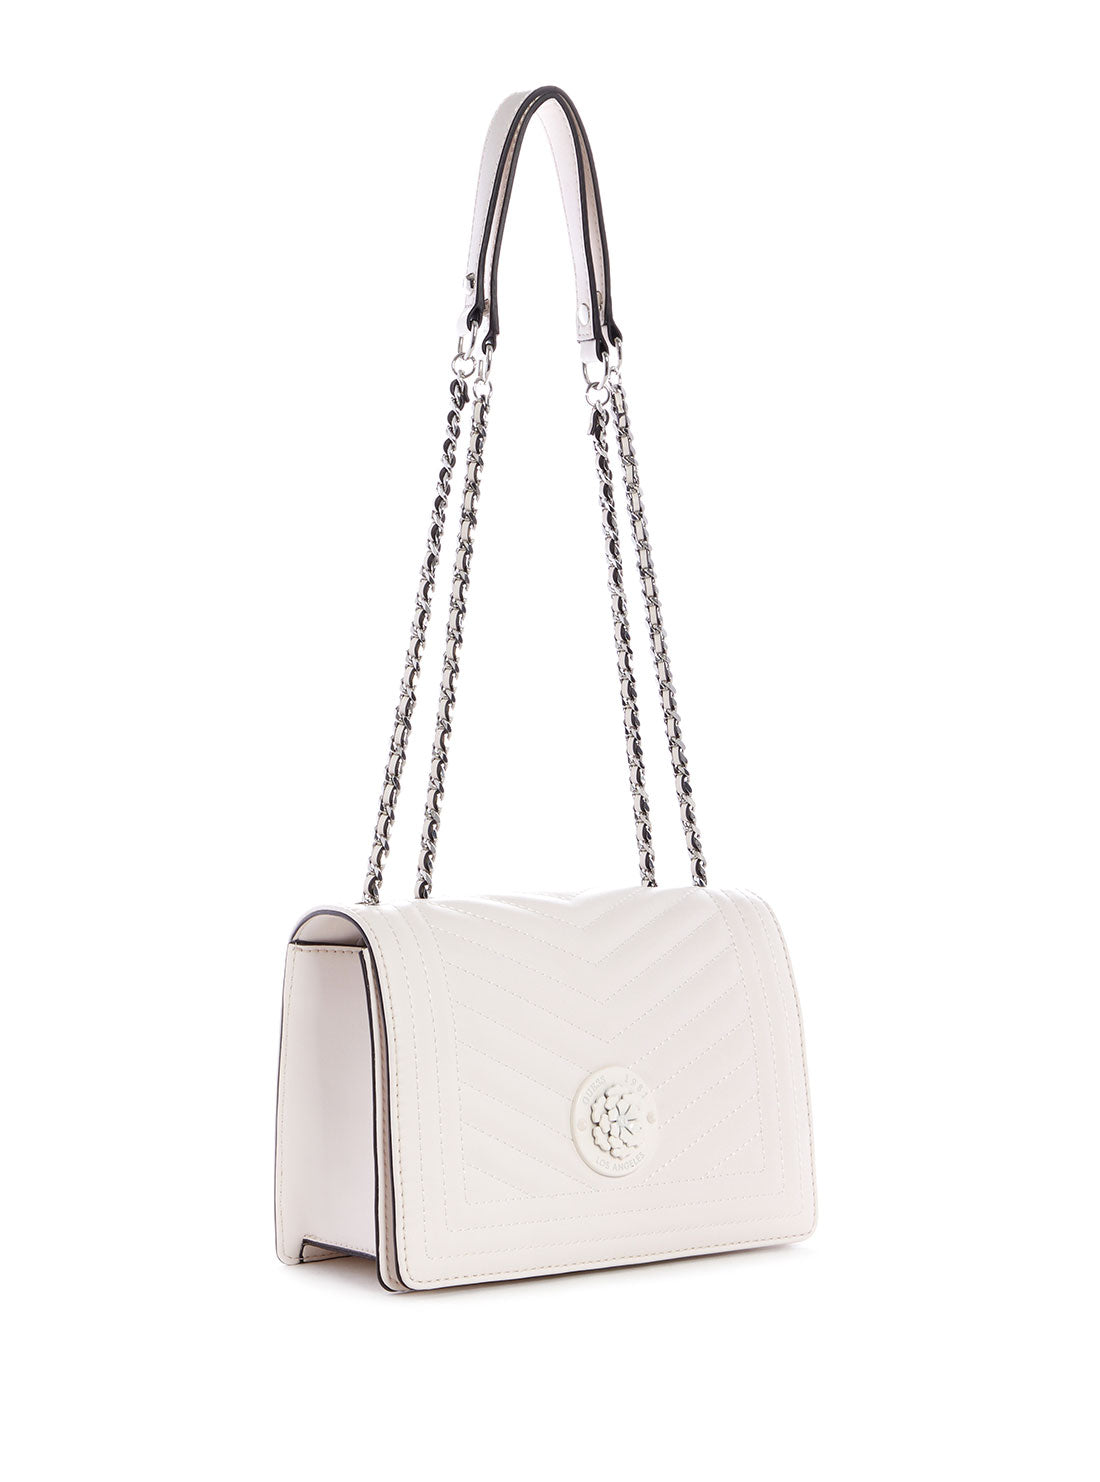 GUESS Womens White Lida Convertible Crossbody Bag VY812721 Side View